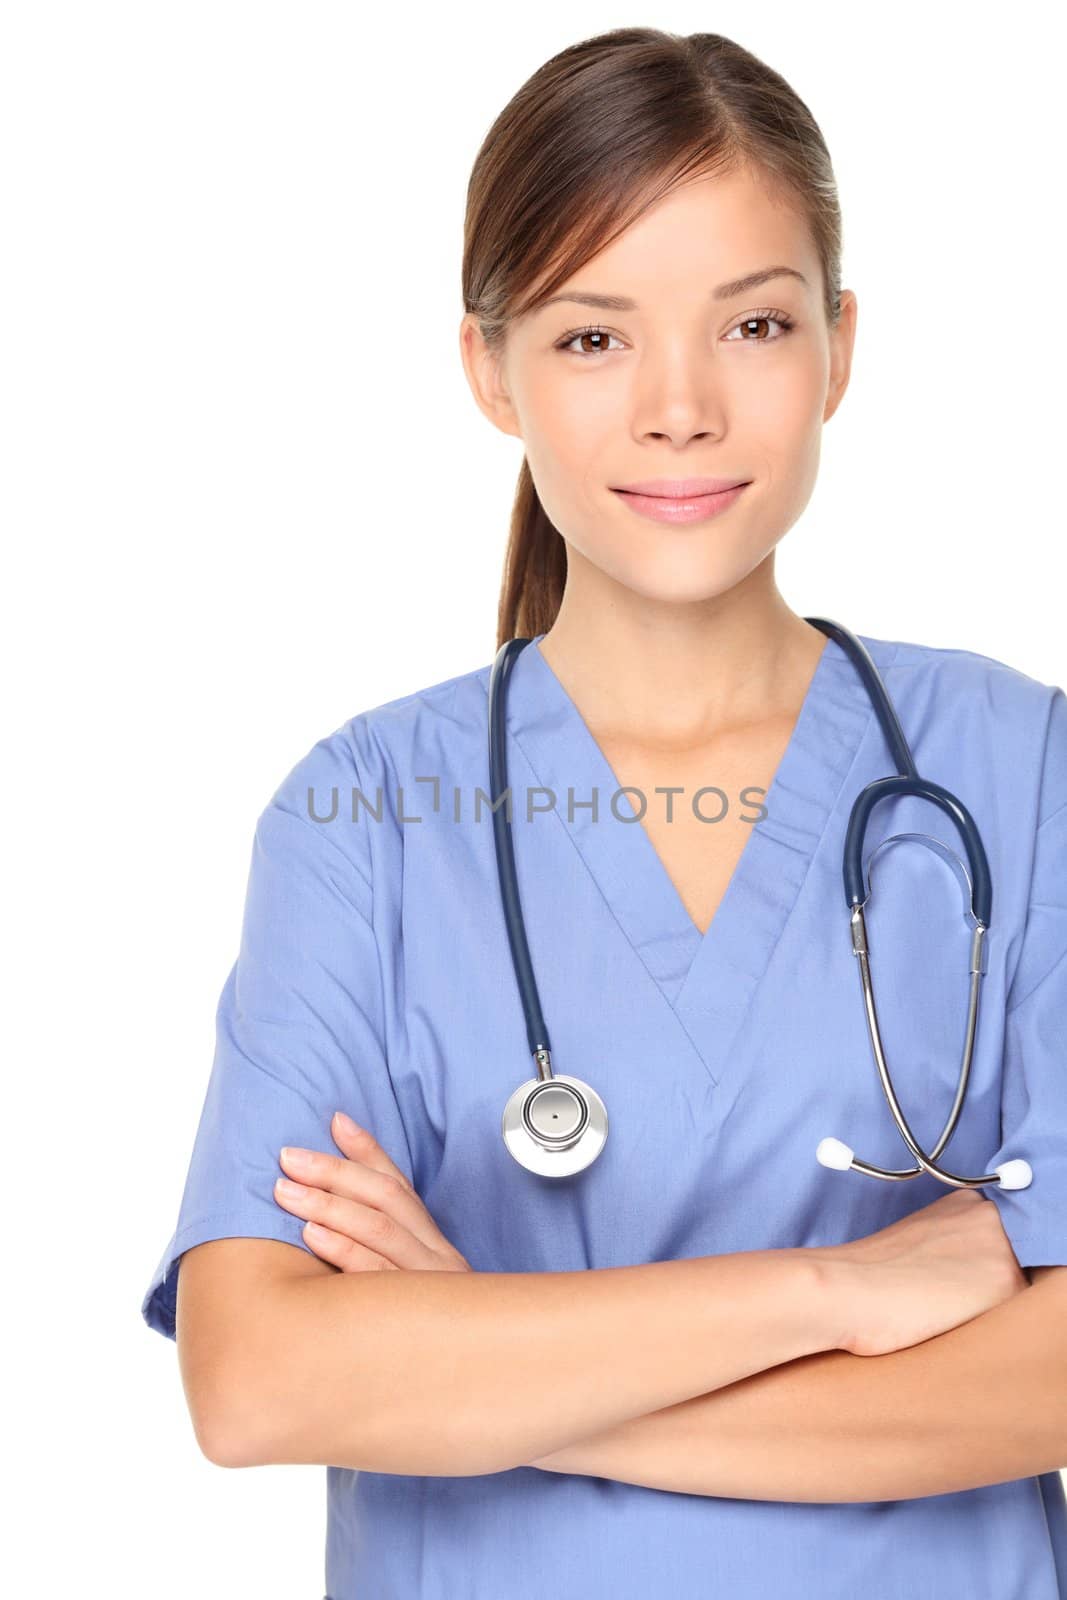 Medical person: Nurse / young doctor portrait. Confident young woman medical professional isolated on white background. Young pretty multiracial Asian / Caucasian female model.